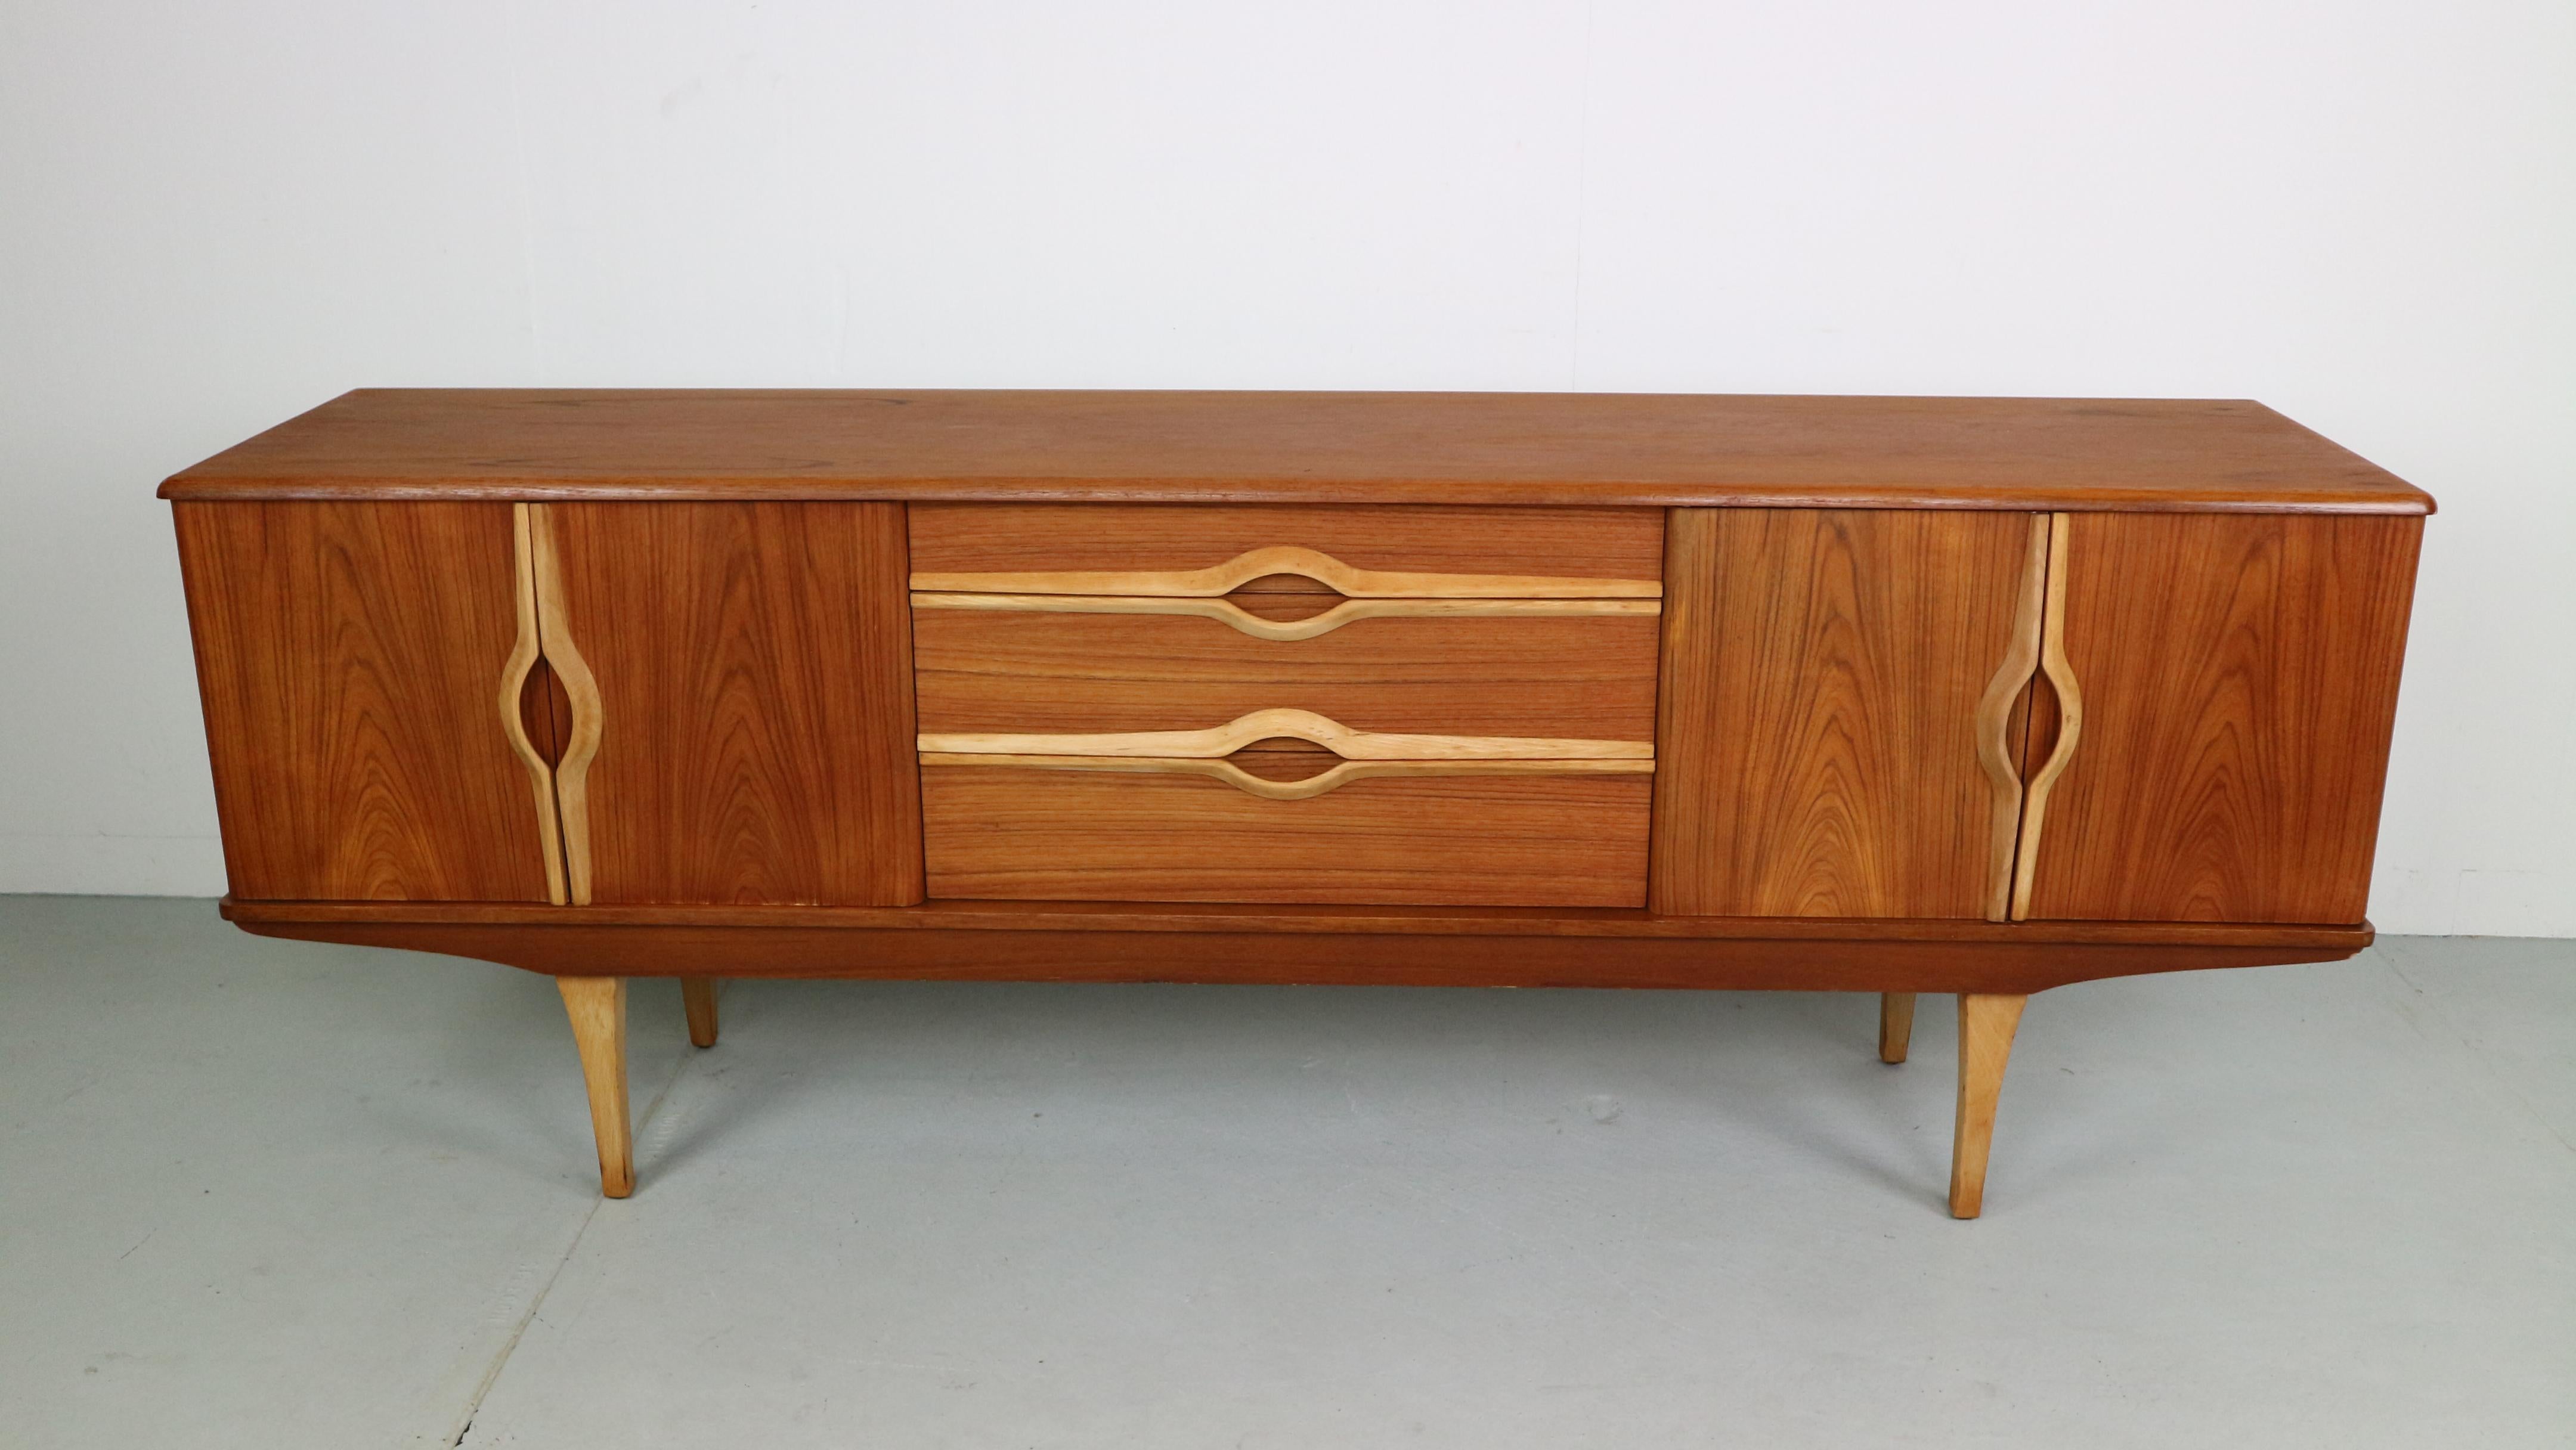 A beautiful design piece by Stonehill. This two-tone teak sideboard has three central drawers, two compartments with folding doors either side all accented by decorative long thin pale teak handles giving the piece a unique look.